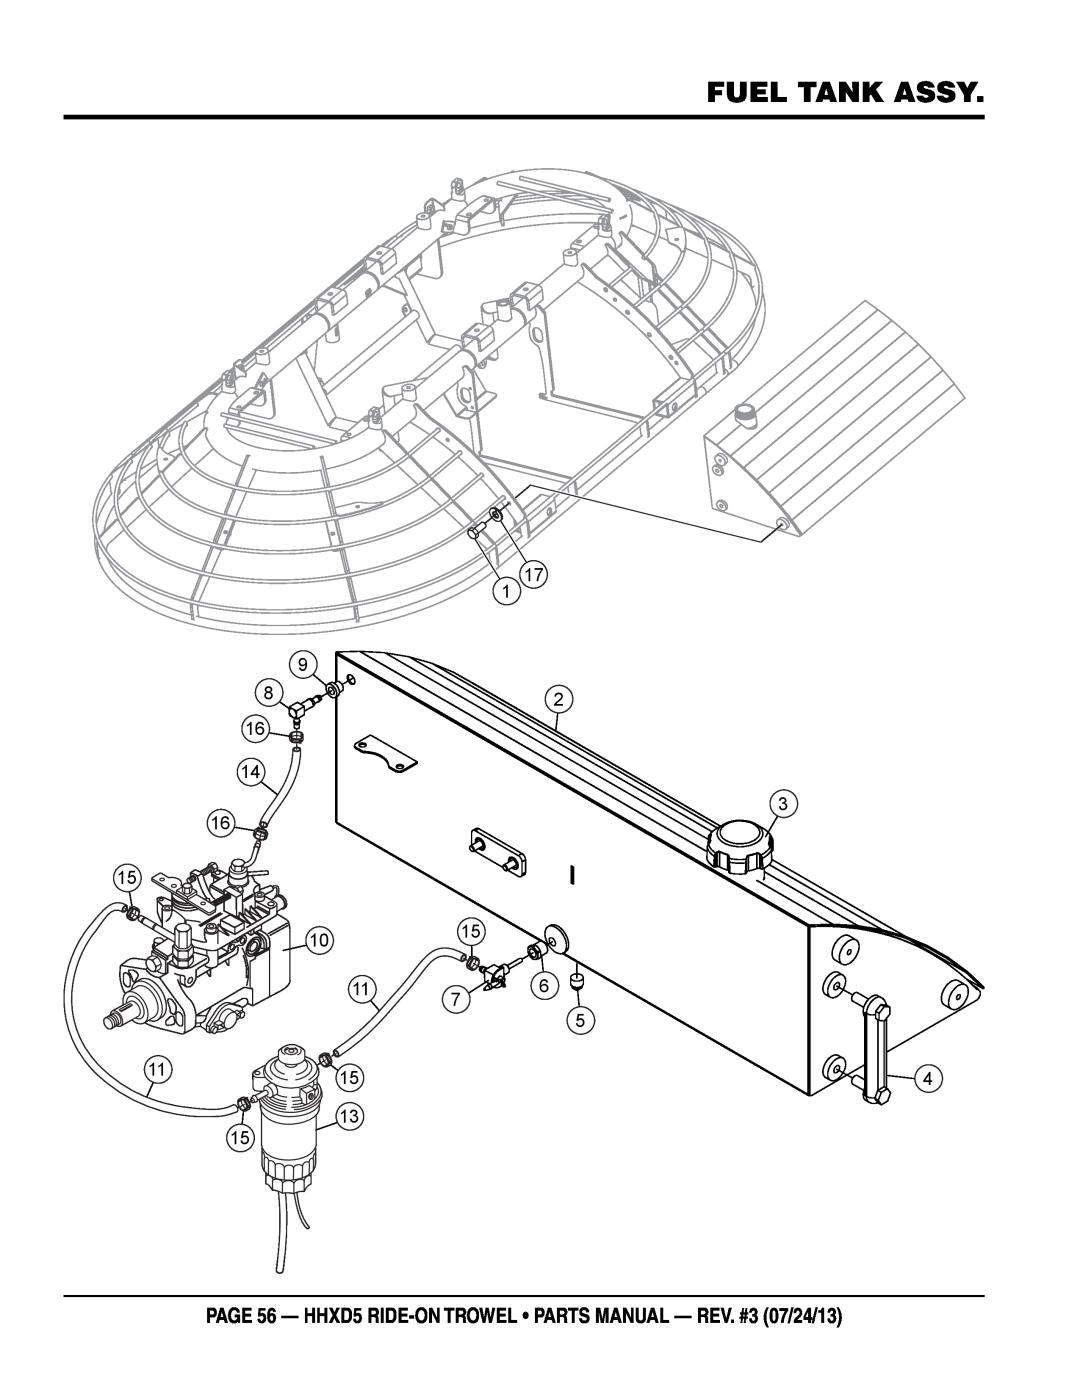 Multiquip HHSD5 FUEL TANK assy, page 56 - HHXD5 RIDE-ON TROWEL parts manual - rev. #3 07/24/13 